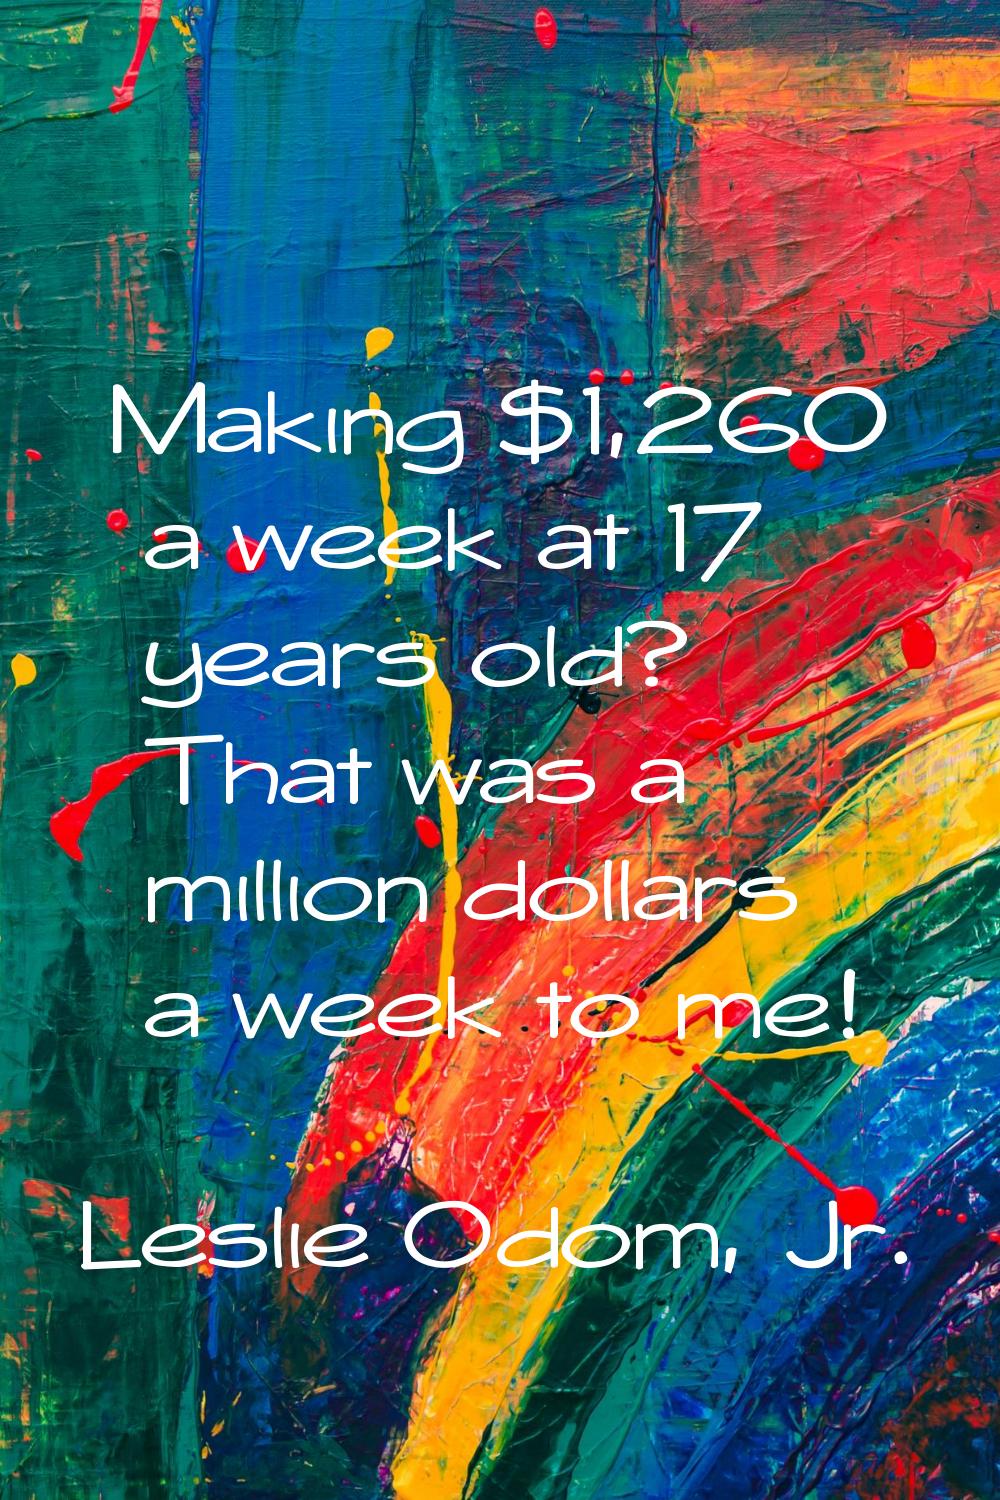 Making $1,260 a week at 17 years old? That was a million dollars a week to me!